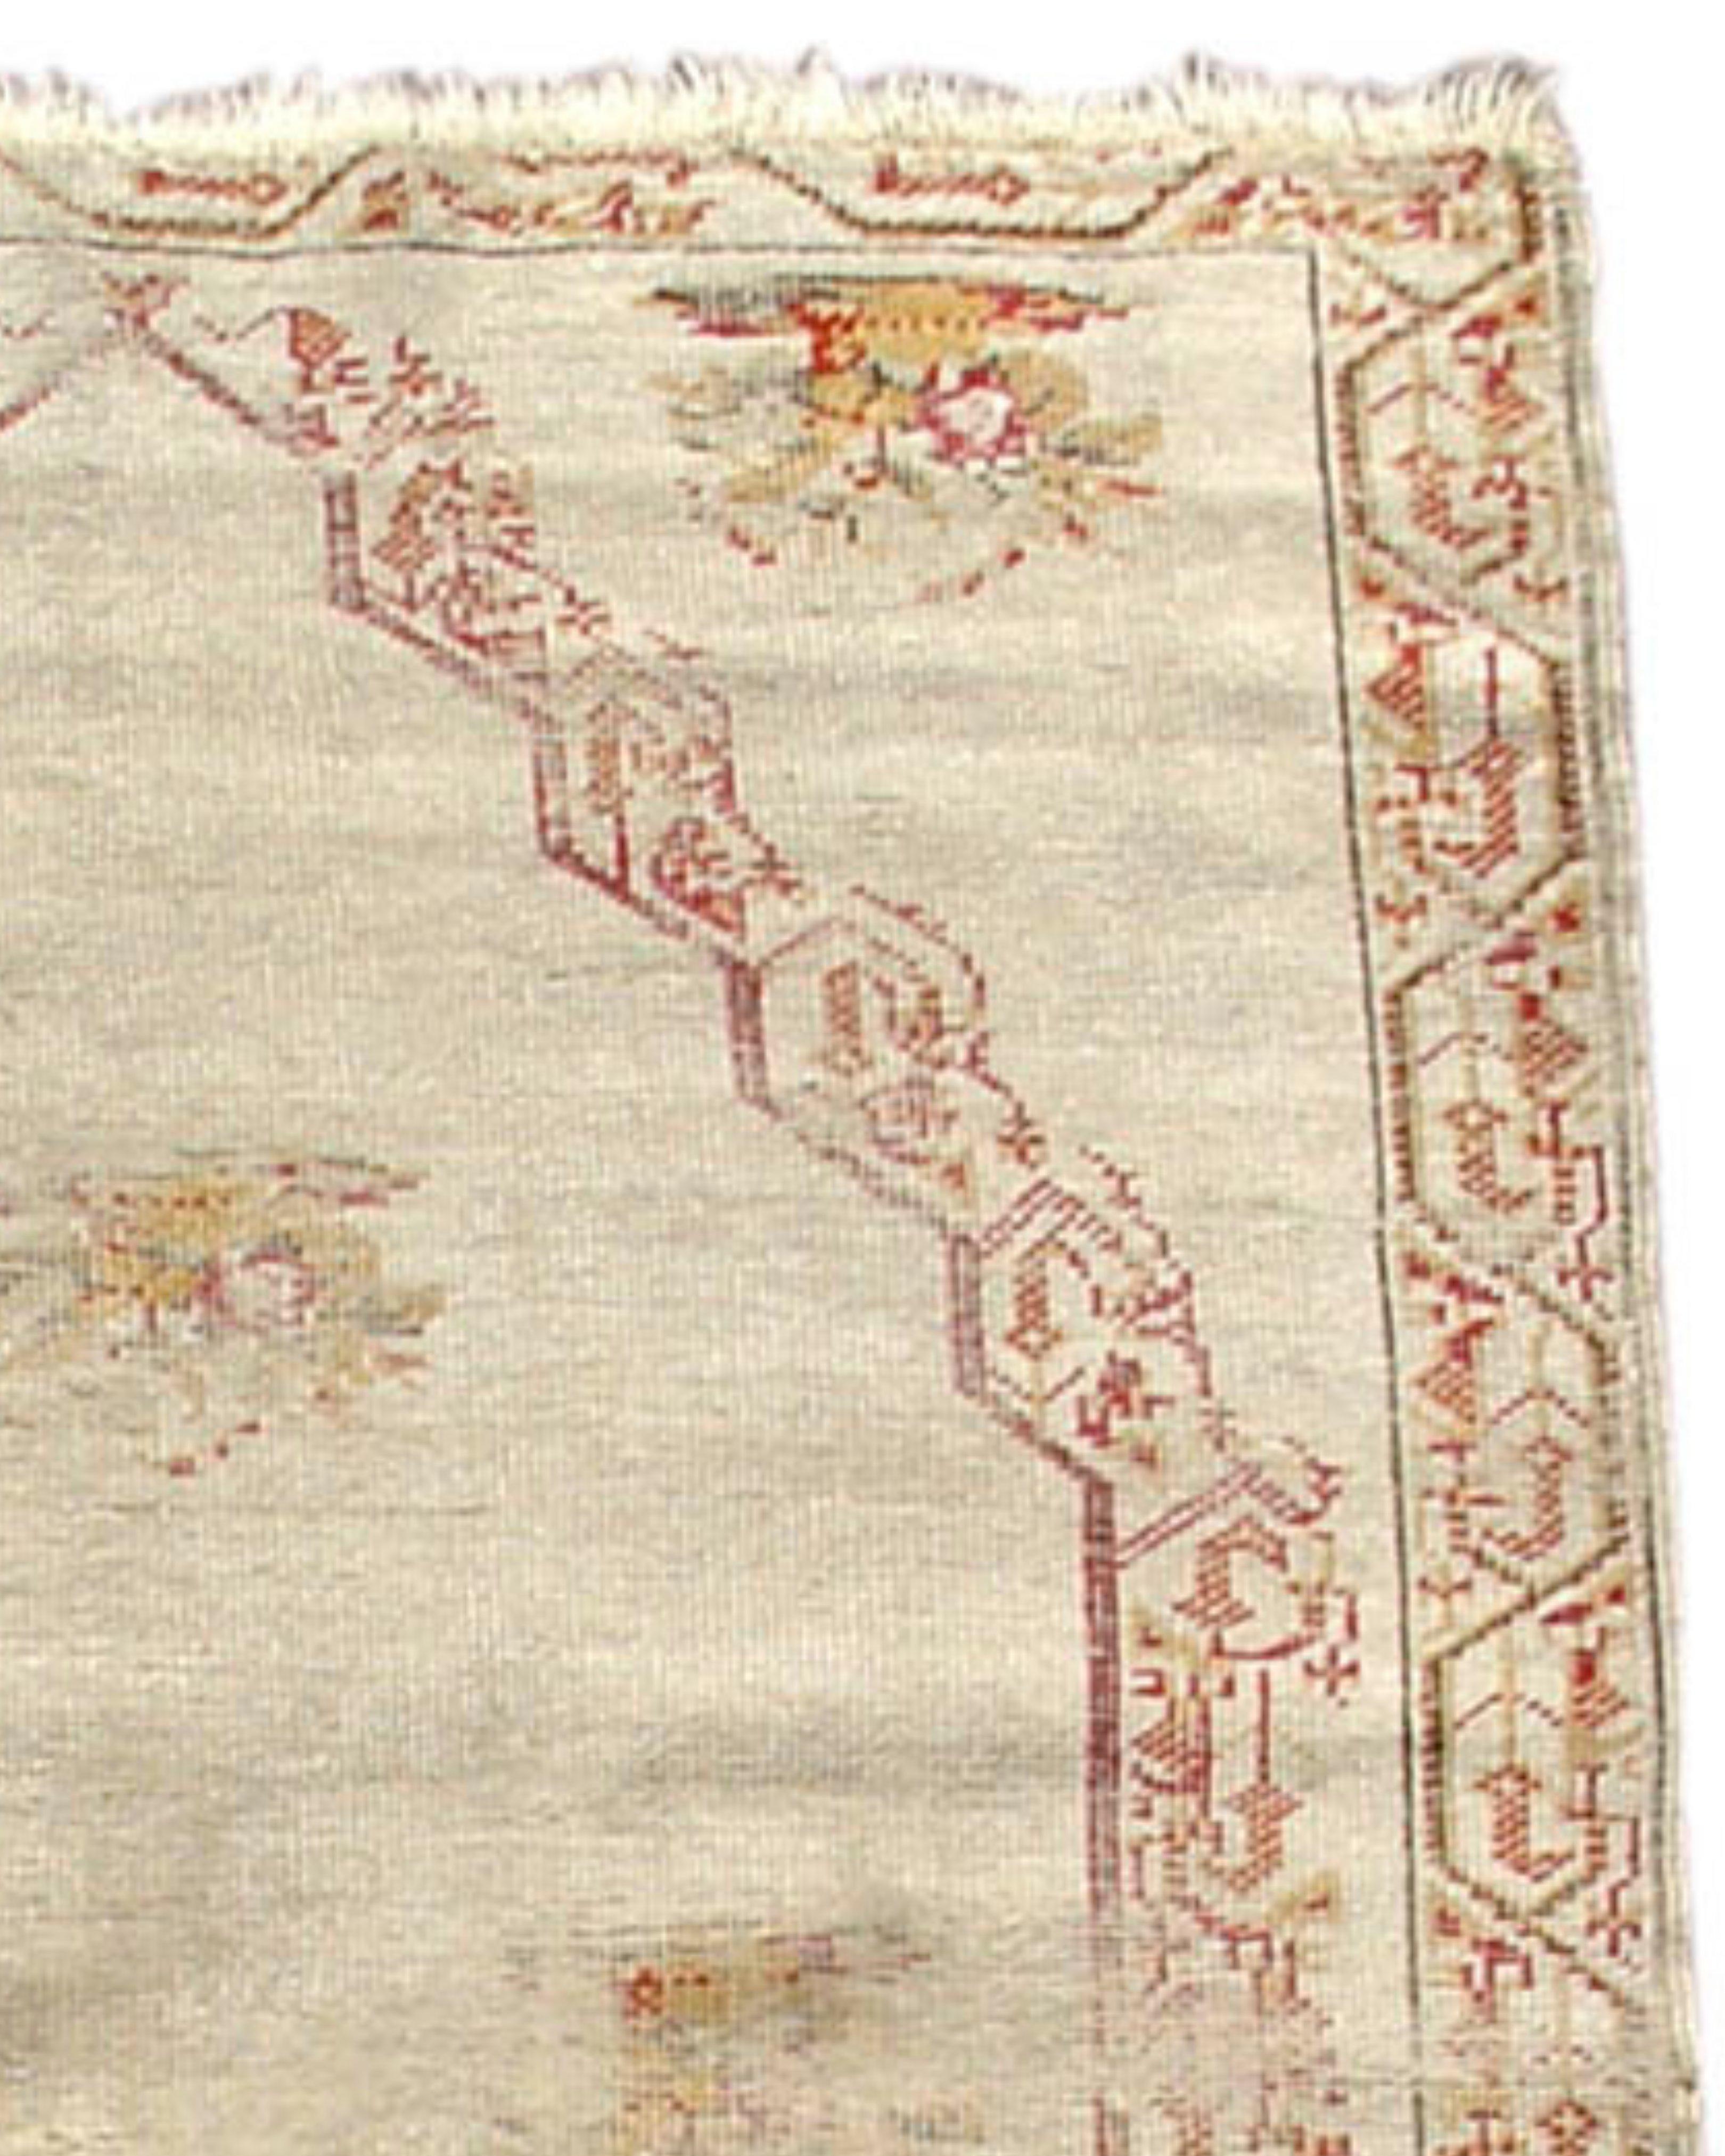 Ghiordes Rug, 19th Centuy

Additional Information:
Dimensions: 3'0